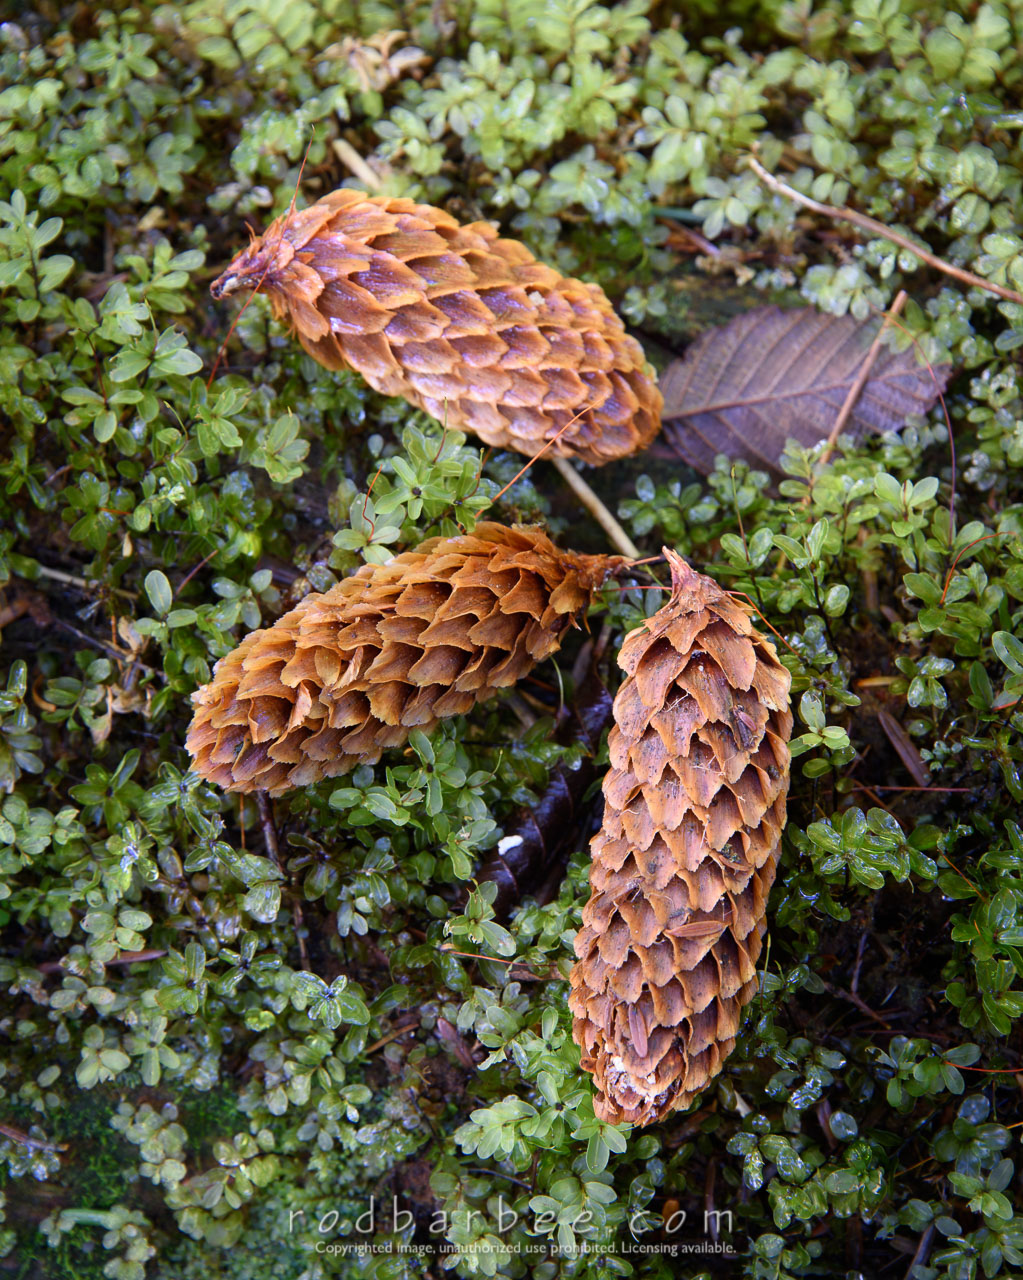 Barbee_150809_3957  | Syntax Error: unexpected symbol near 'then' Spruce cones on mossy log. Forest floor detail. Sitka, Alaska